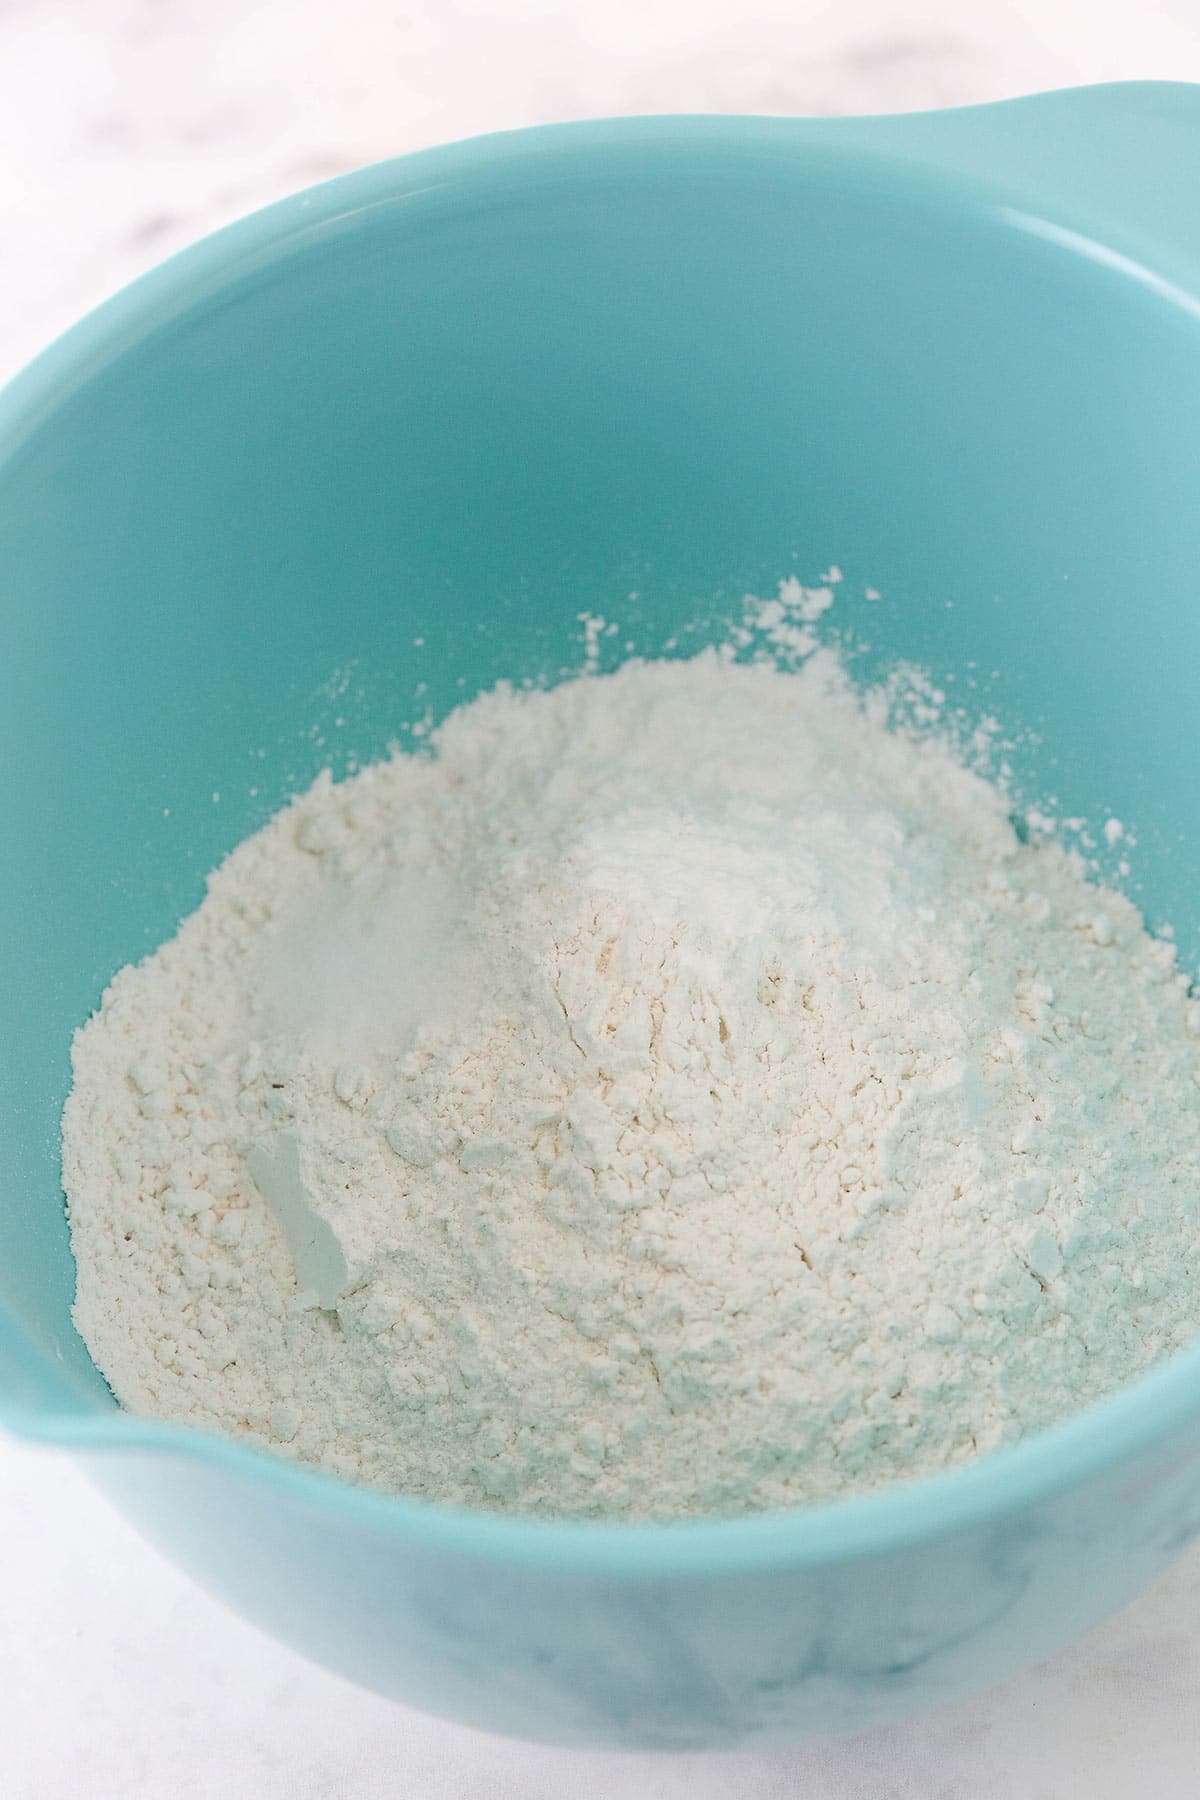 The combined dry ingredients inside of a light blue mixing bowl